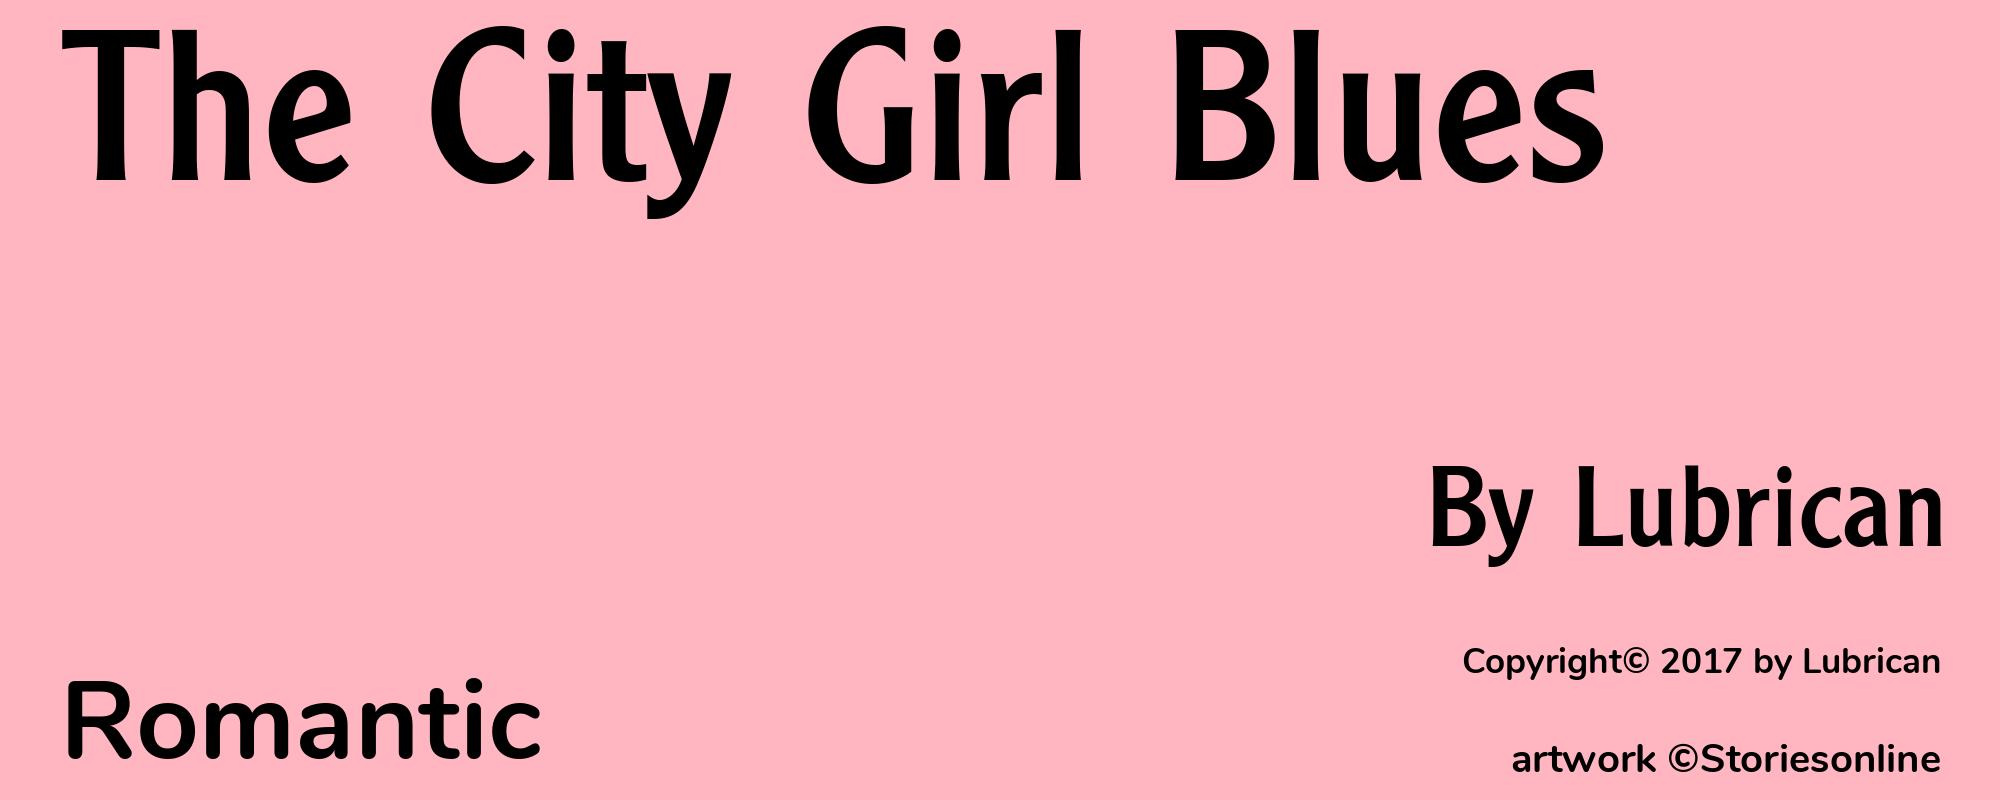 The City Girl Blues - Cover